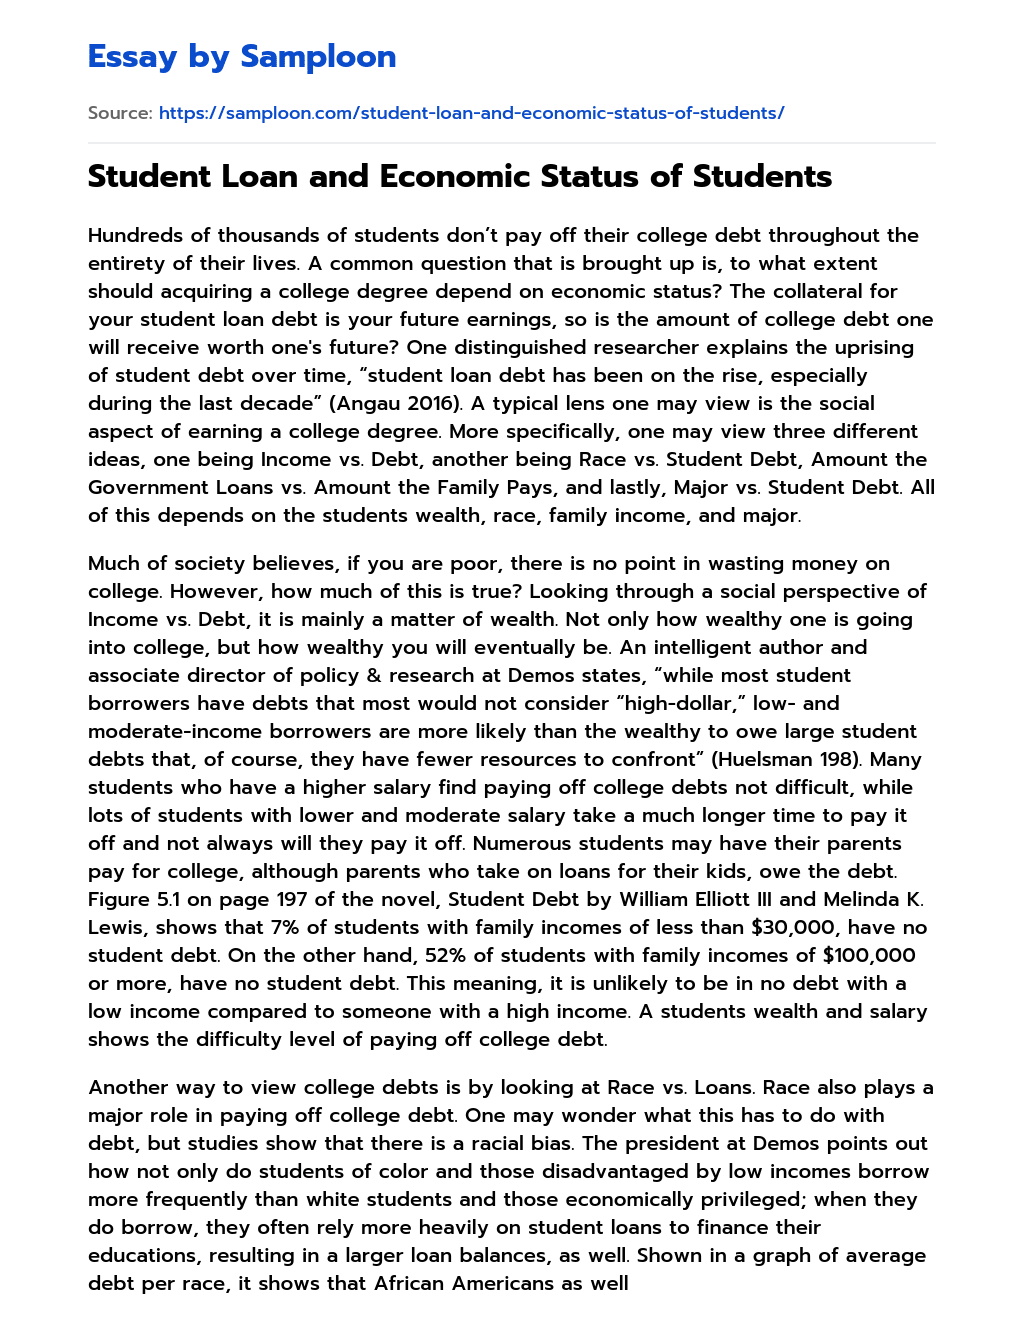 Student Loan and Economic Status of Students essay